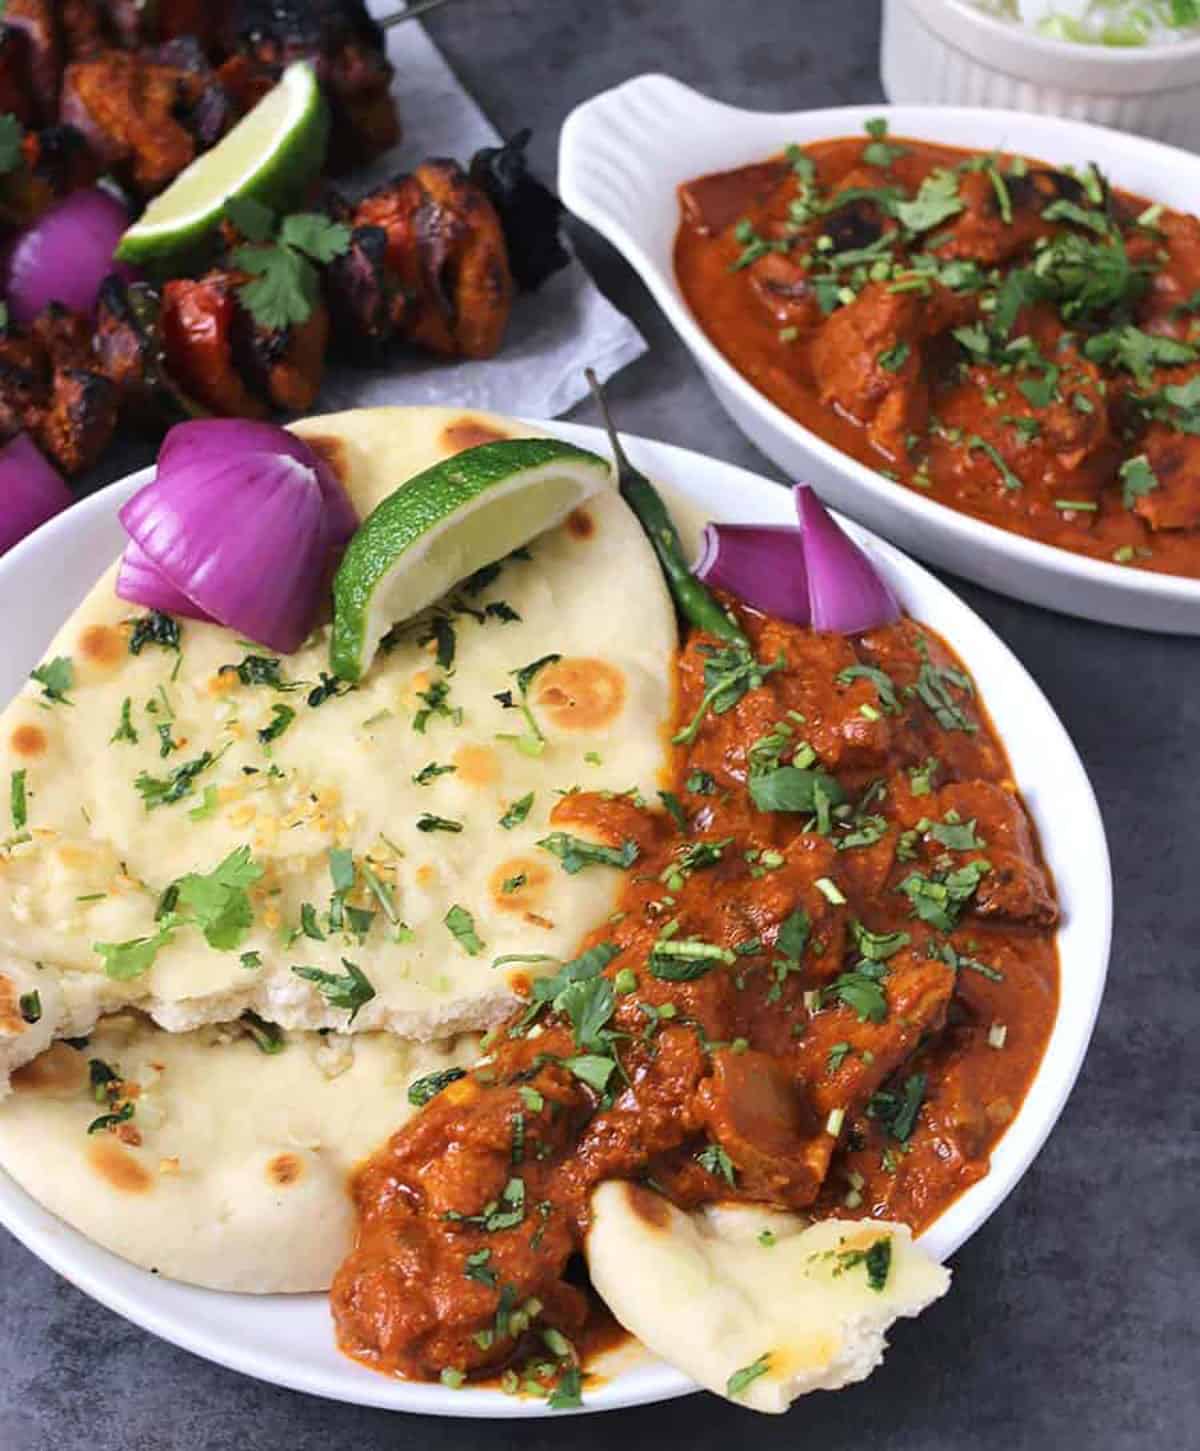 Restaurant-style chicken tikka masala serve in a white plate along with naan bread, red onion slices and a lemon wedge.